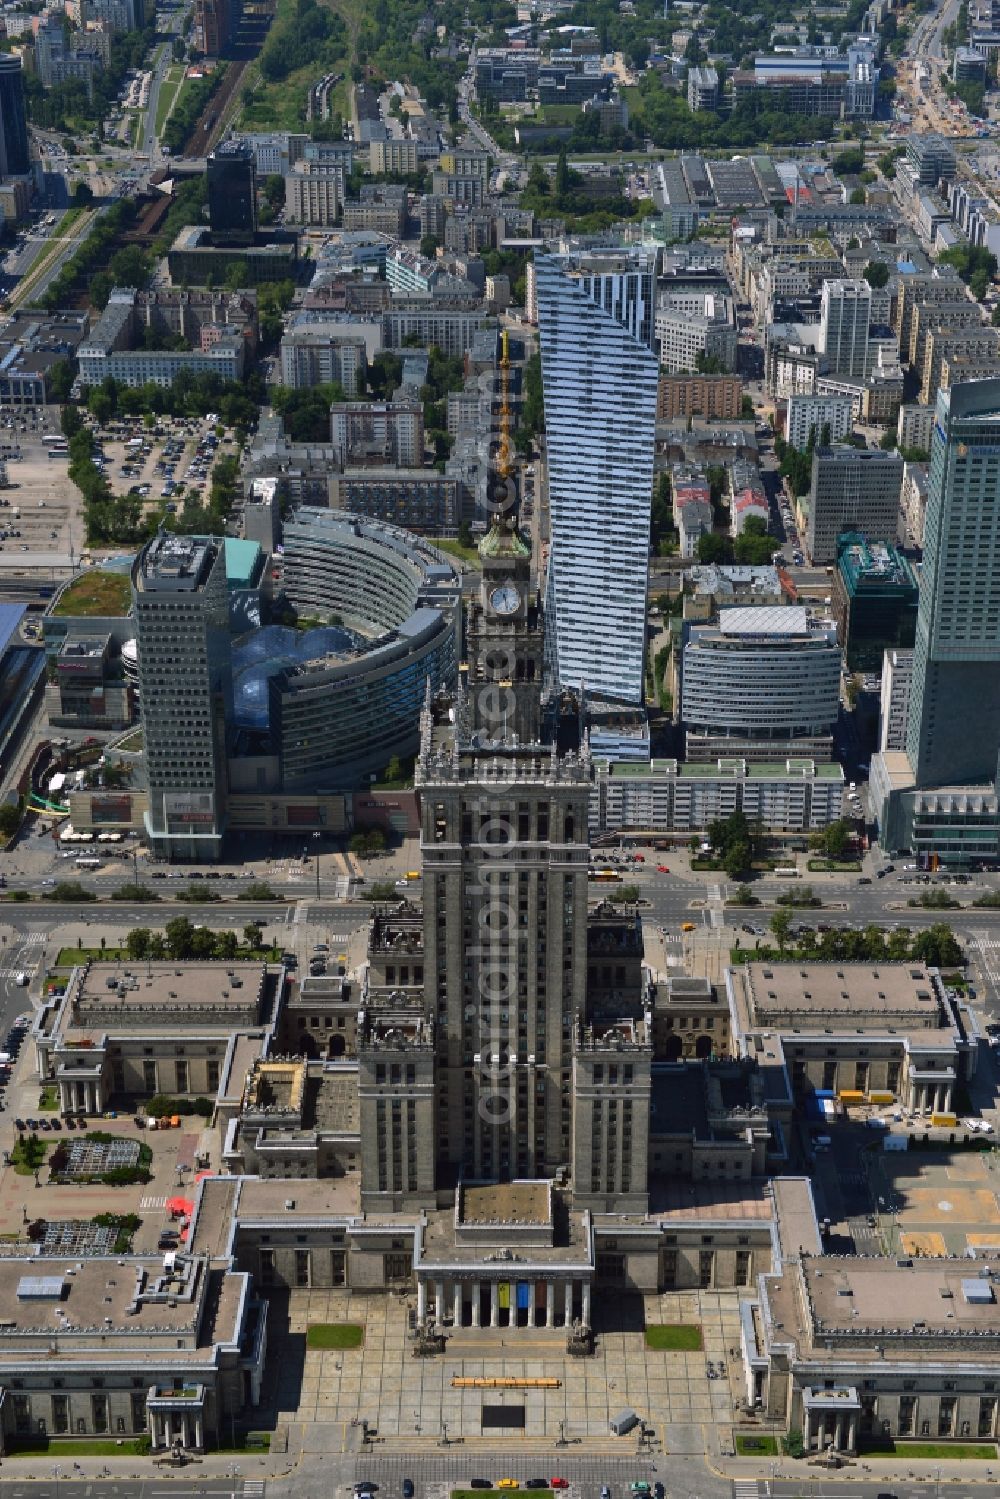 Aerial photograph Warschau - The high-rise building complex of the Palace of Culture and Science (Palac Kultury i Nauki Polish) in downtown Warsaw in Poland. The building and landmark of the city was a gift by the former Soviet Union. It was designed by the architect Lew Rudnew in a socialist classicist style. It is the highest building in Poland and is surrounded by new high rise buildings and towers. Its top is used as an antenna and broadcasting tower for radio, TV and several mobile network operators